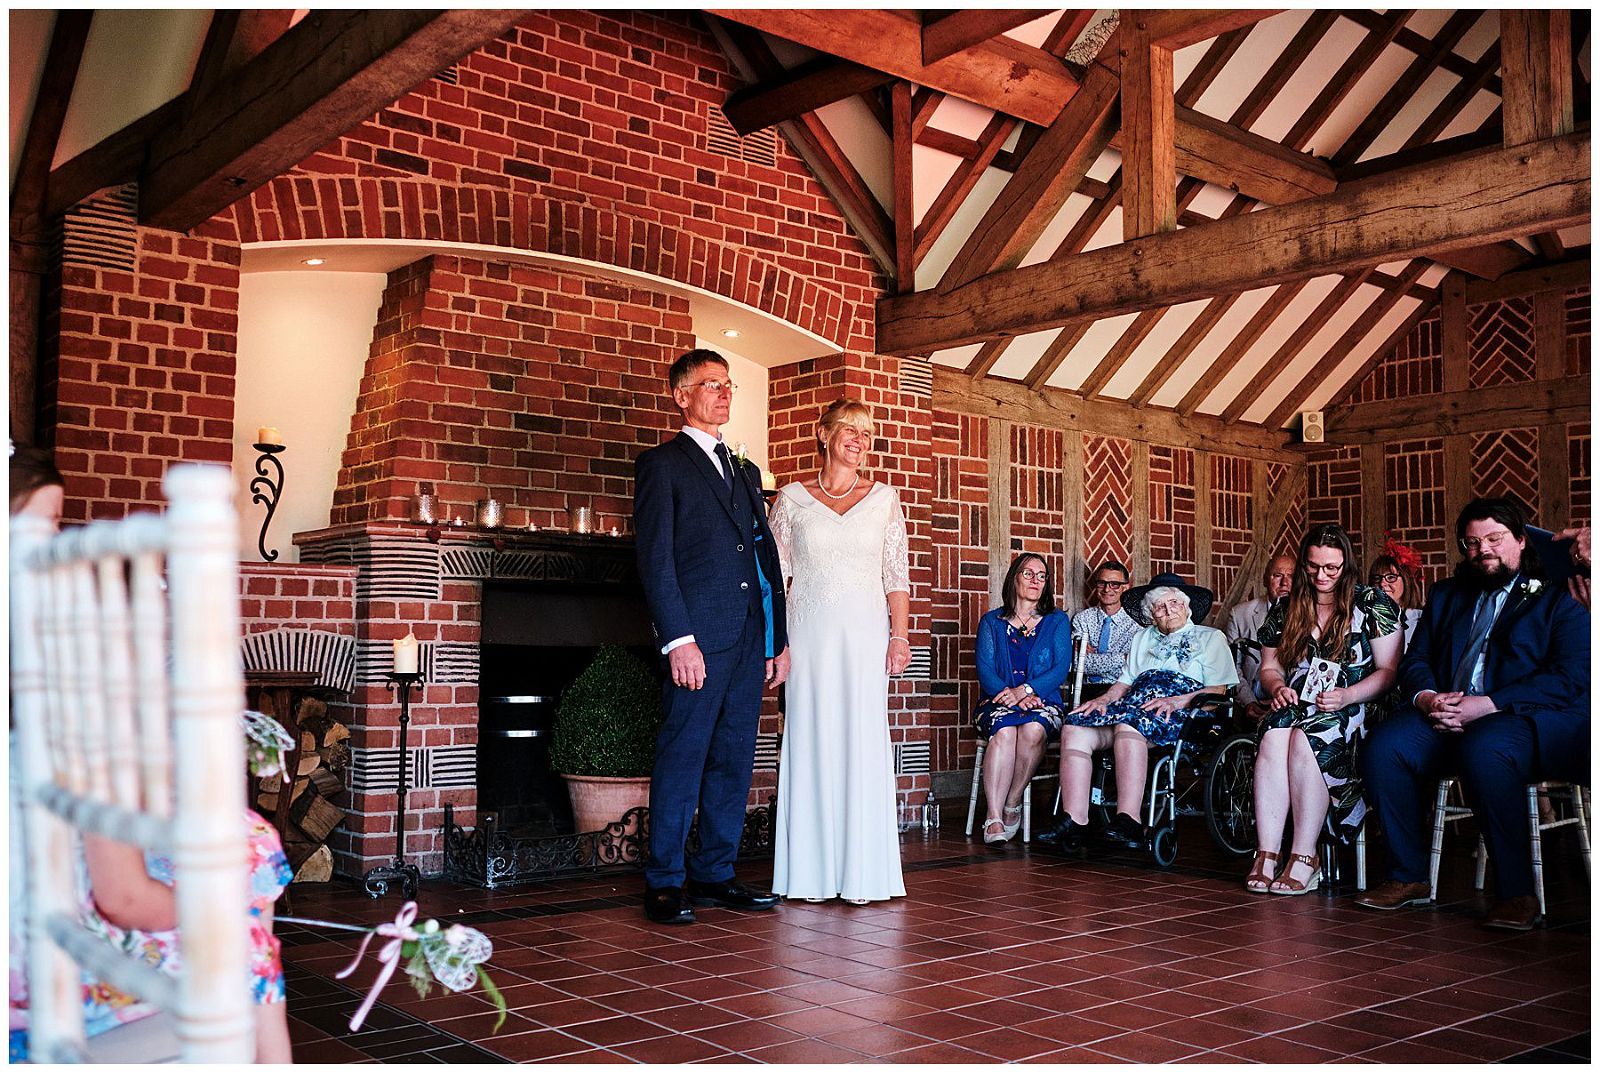 Capturing the emotions and moments of the wedding ceremony in the Garden Pavilion at Goldstone Hall in Shropshire by Documentary Wedding Photographer Stuart James